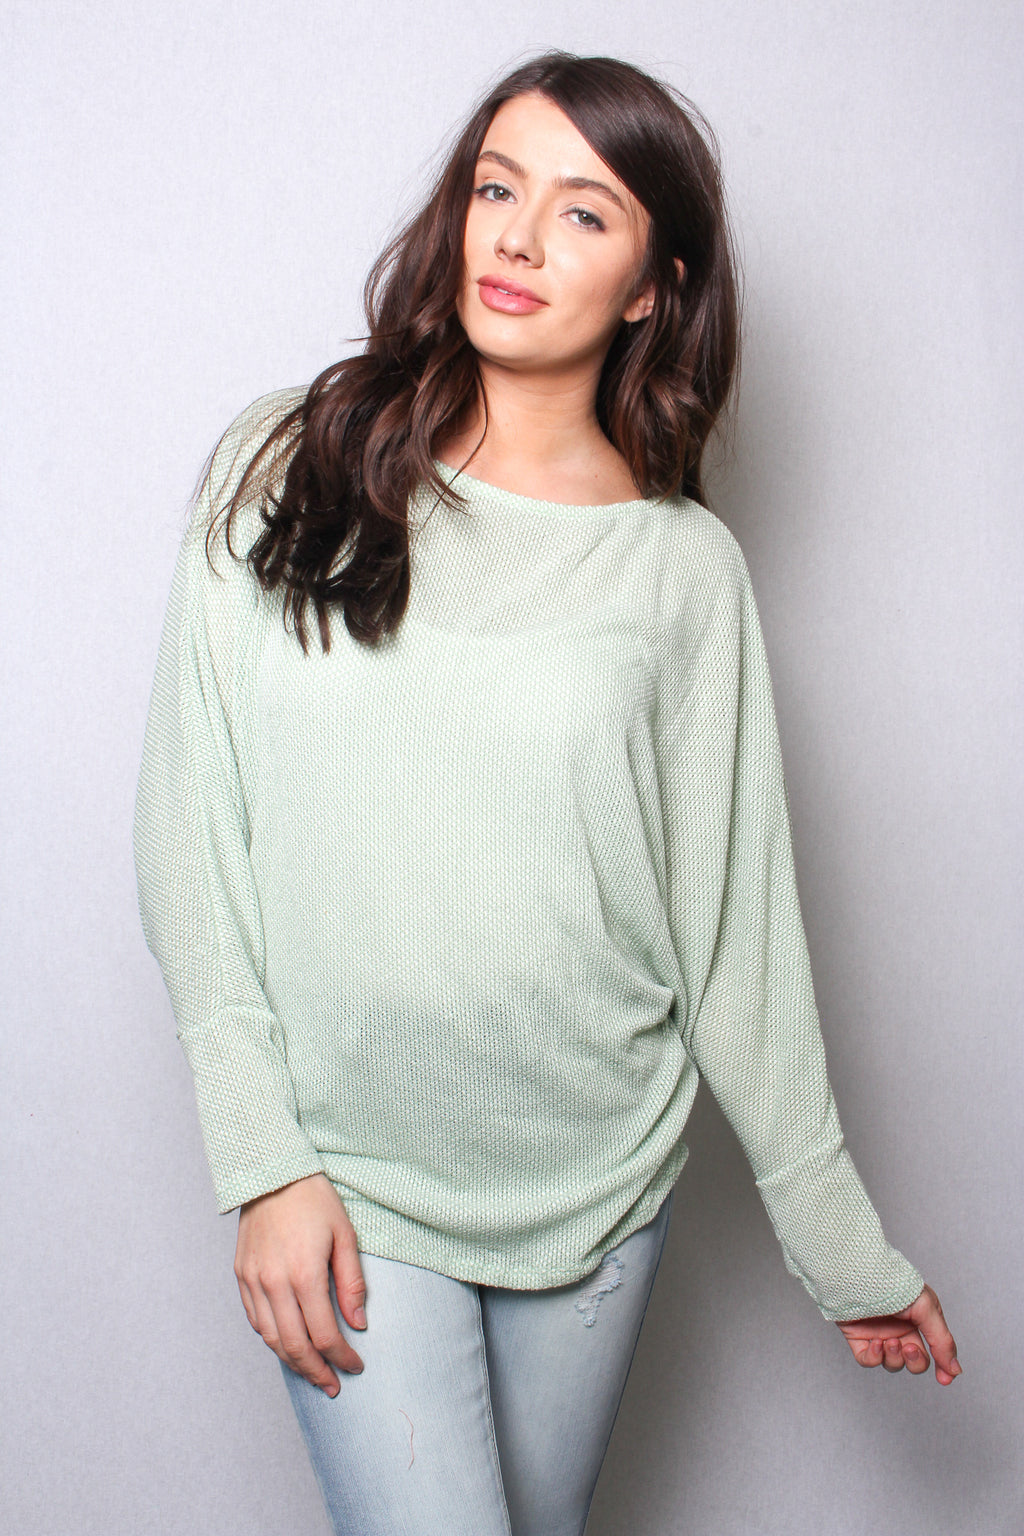 Women's Round Neck Long Sleeves Unlined Knit Top